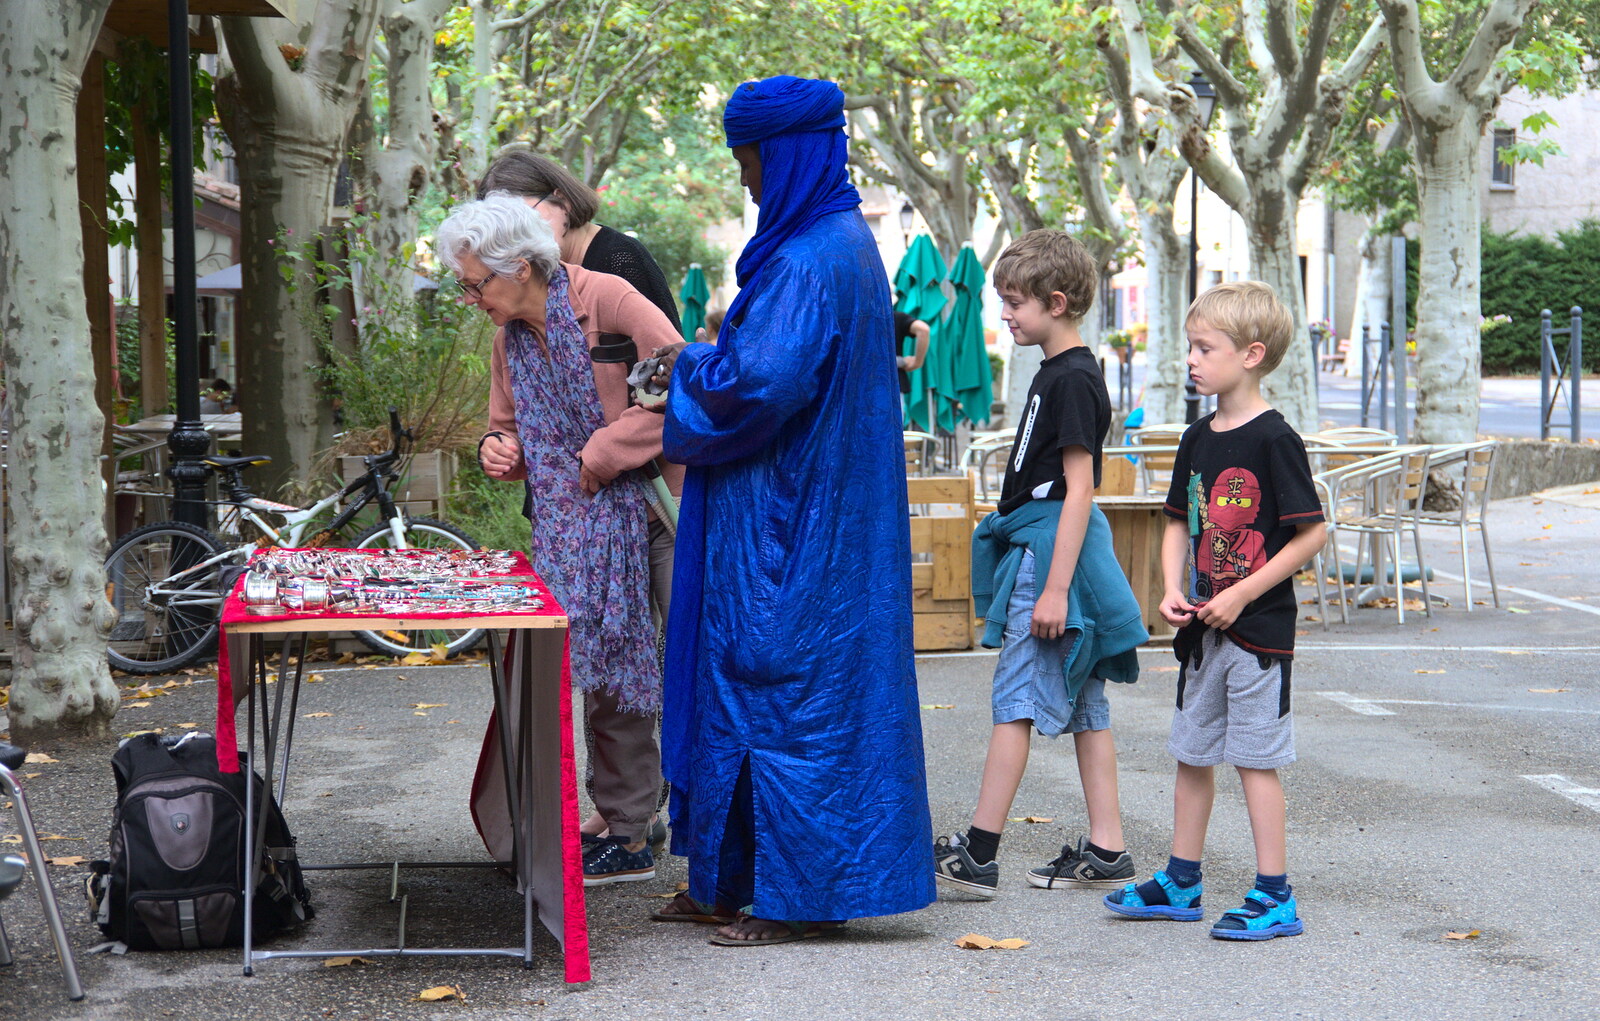 A dude in spectacularly-blue robes sells jewellry from Abbaye Sainte-Marie de Lagrasse and The Lac de la Cavayère, Aude, France - 10th August